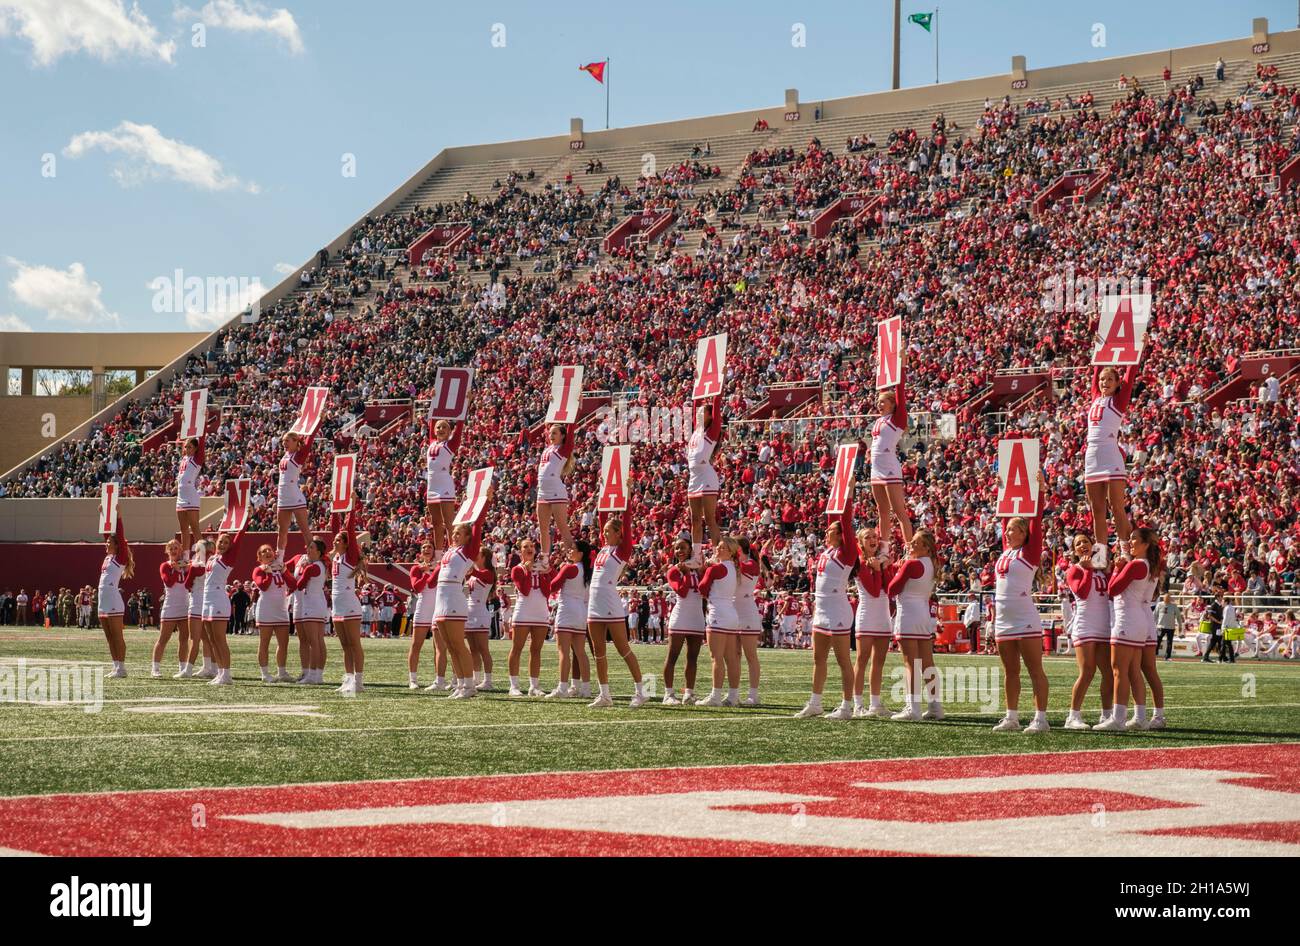 BLOOMINGTON, UNITED STATES - 2021/10/16: Indiana University cheerleaders spell out, “Indiana,” as the Hoosiers play against Michigan State during an NCAA football game on October 16, 2021 at Memorial Stadium in Bloomington, Ind. IU lost to Michigan State 20-15. Stock Photo